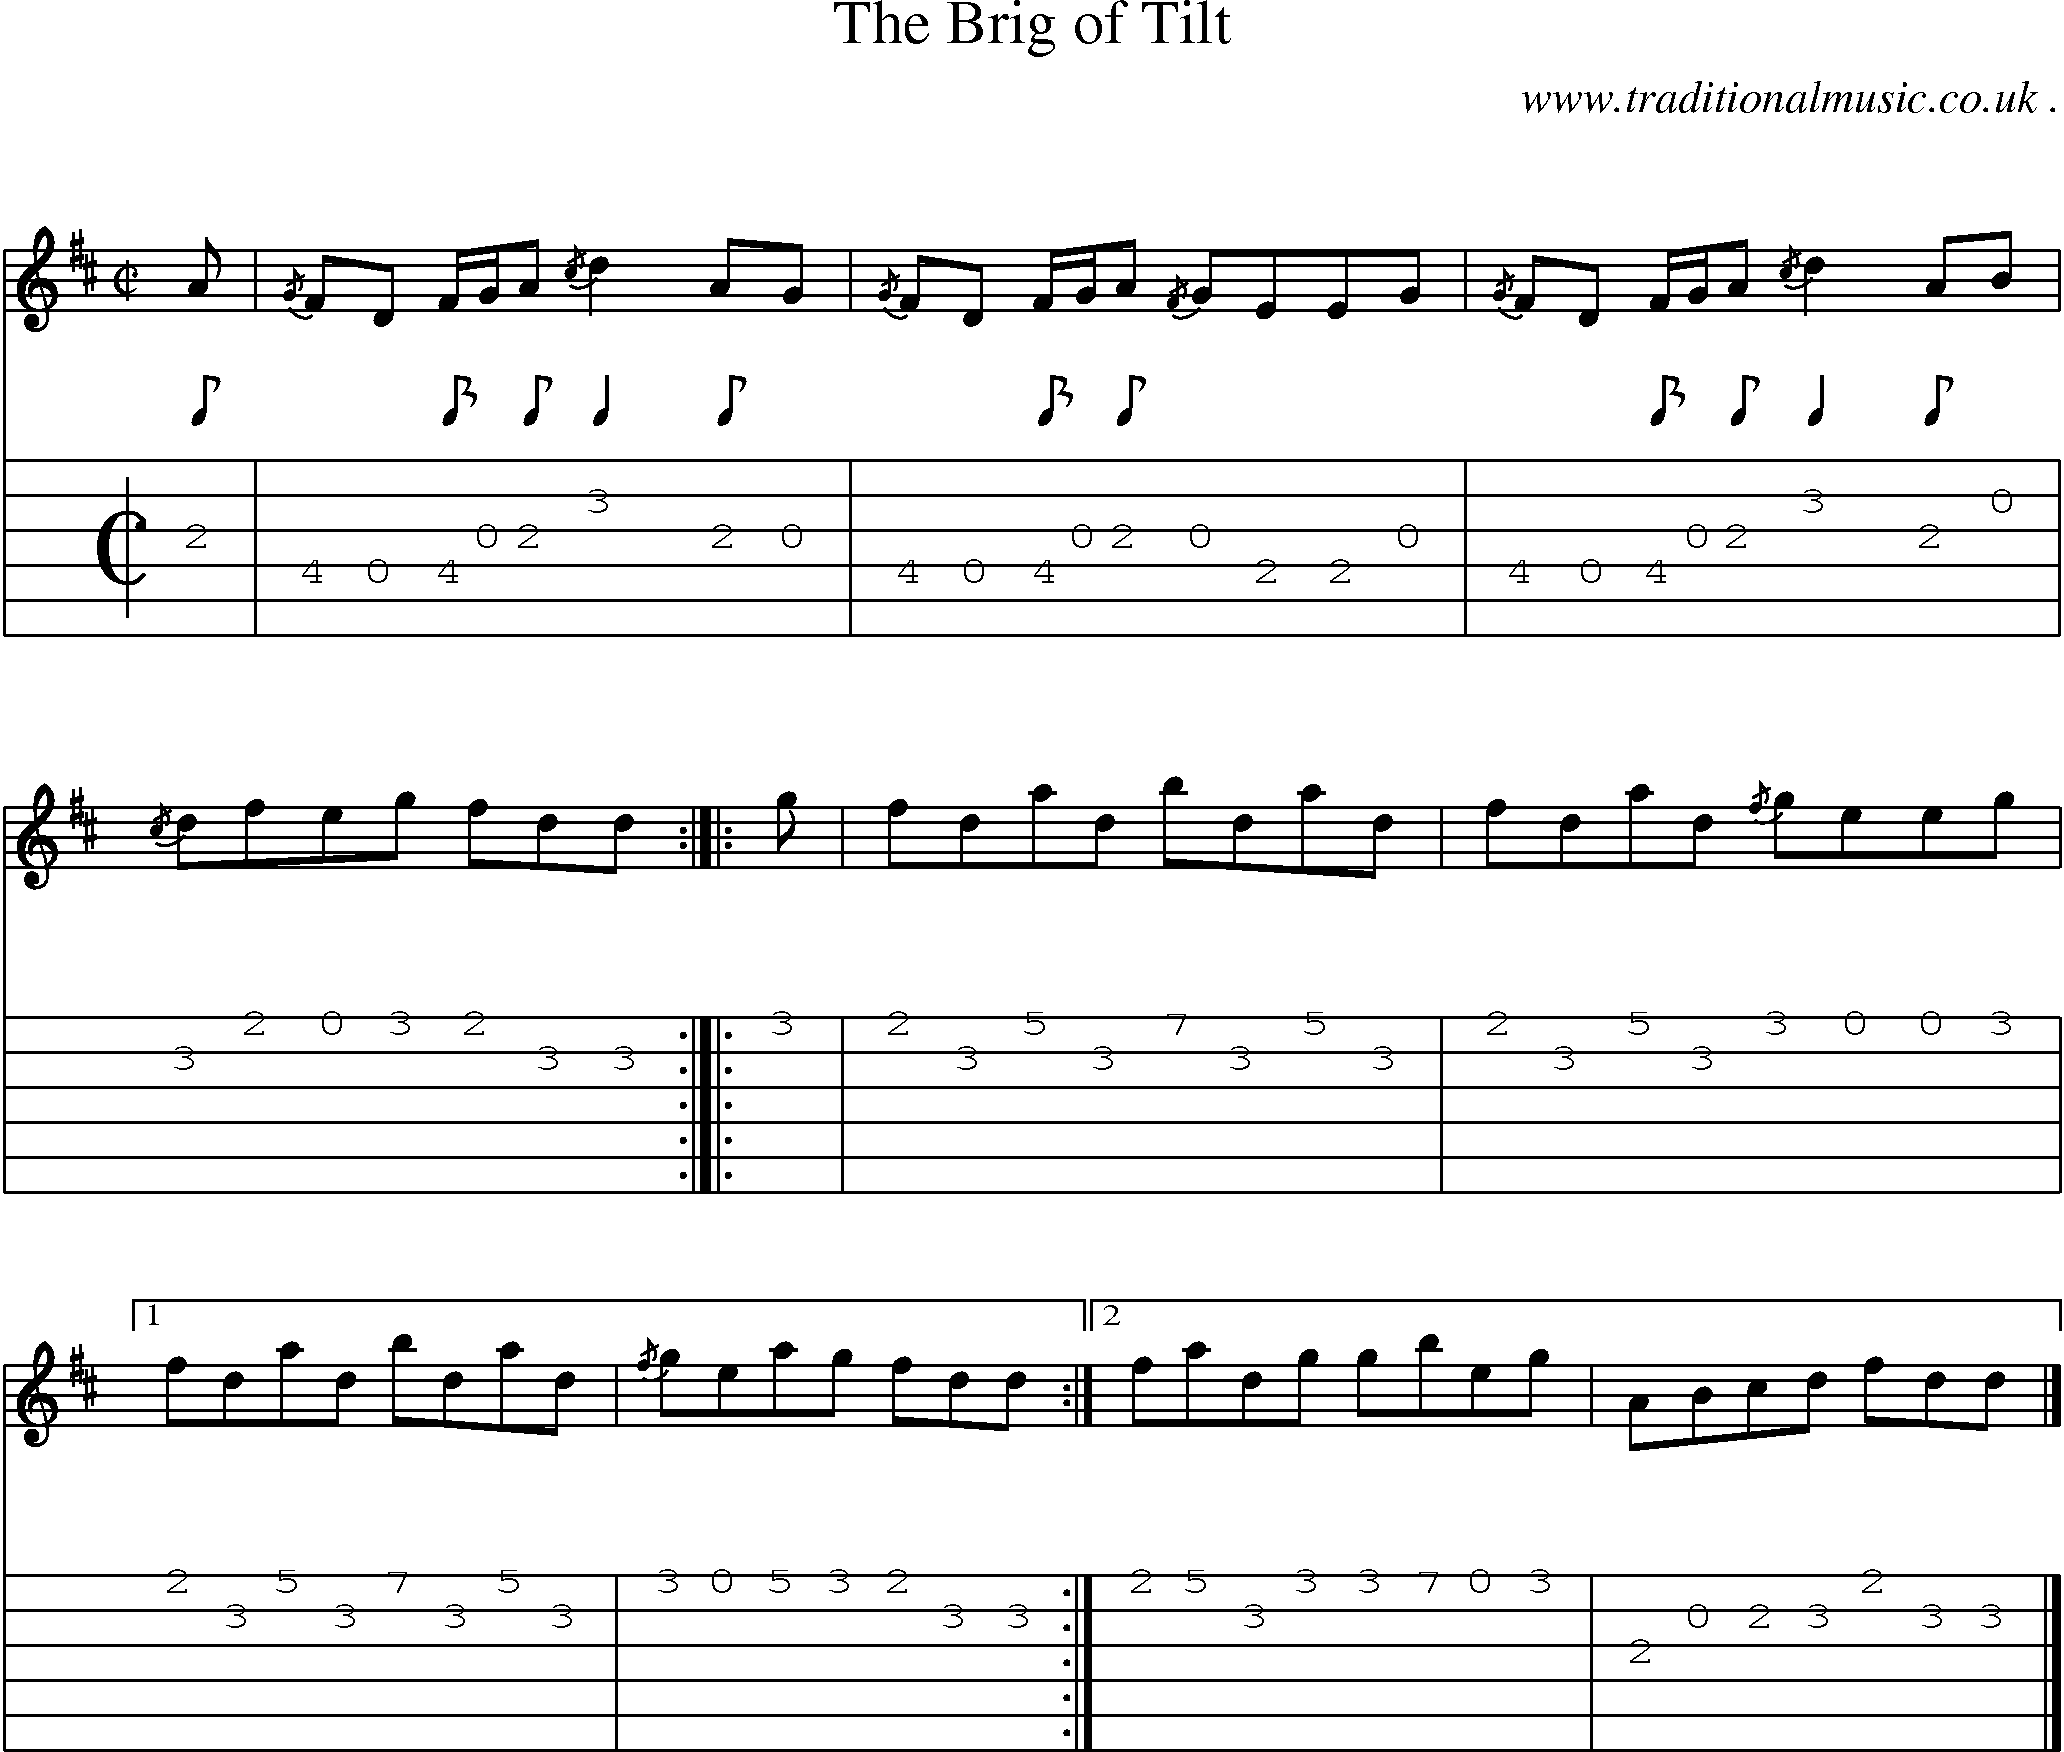 Sheet-music  score, Chords and Guitar Tabs for The Brig Of Tilt